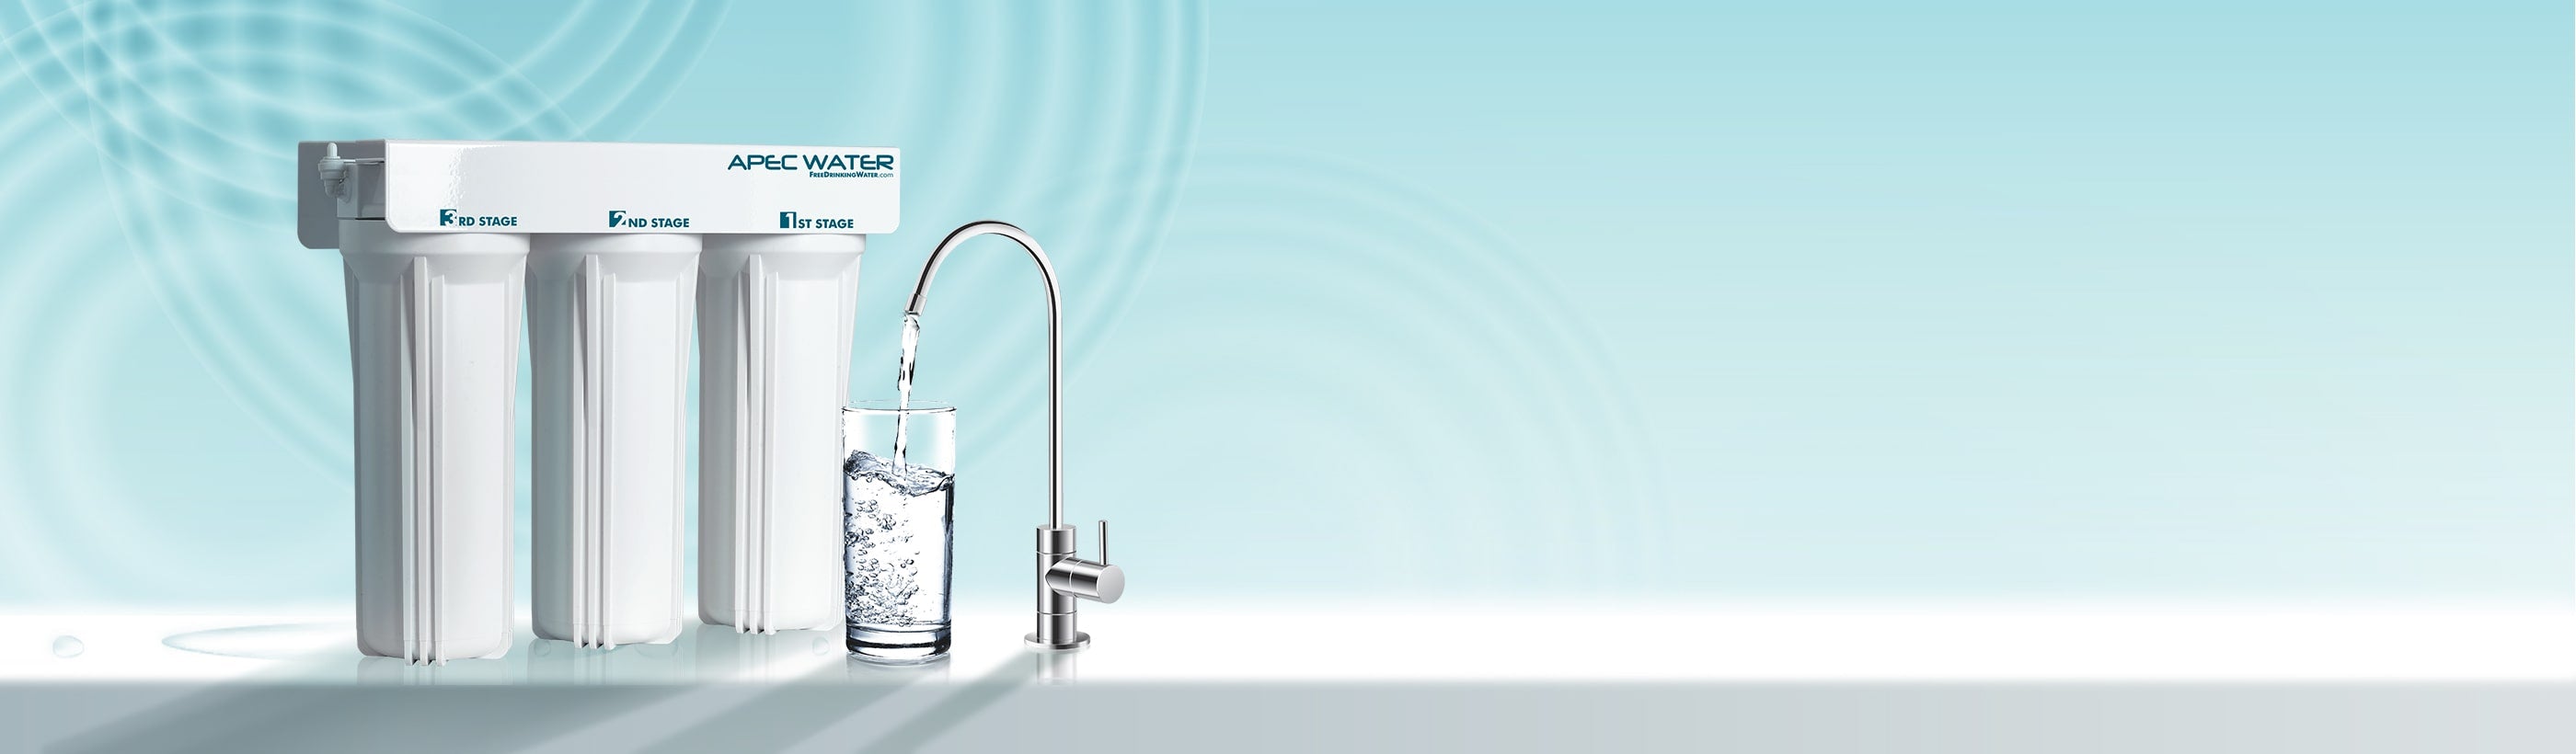 water filtration landing page banner